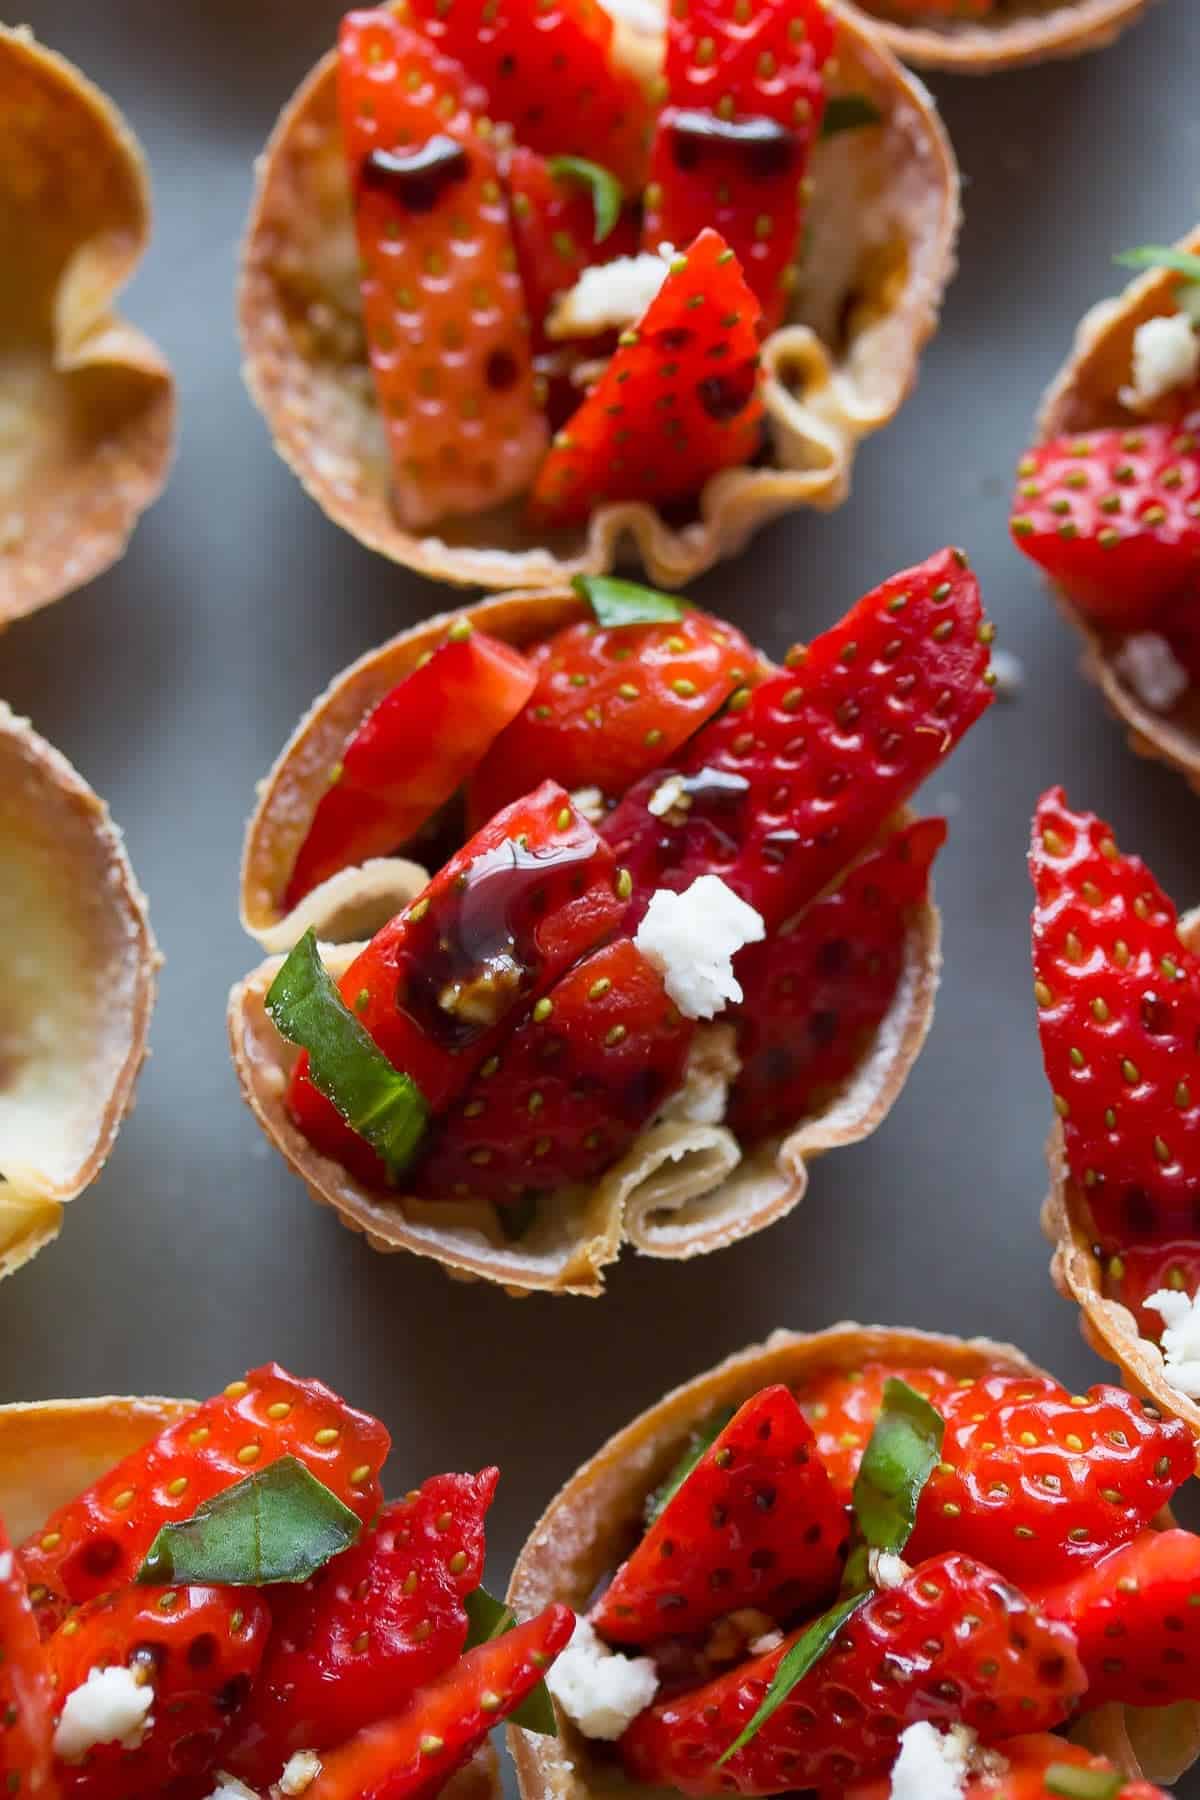 Strawberry Balsamic Bites with Feta and Basil, a lighter make-ahead appetizer option for a party or shower!